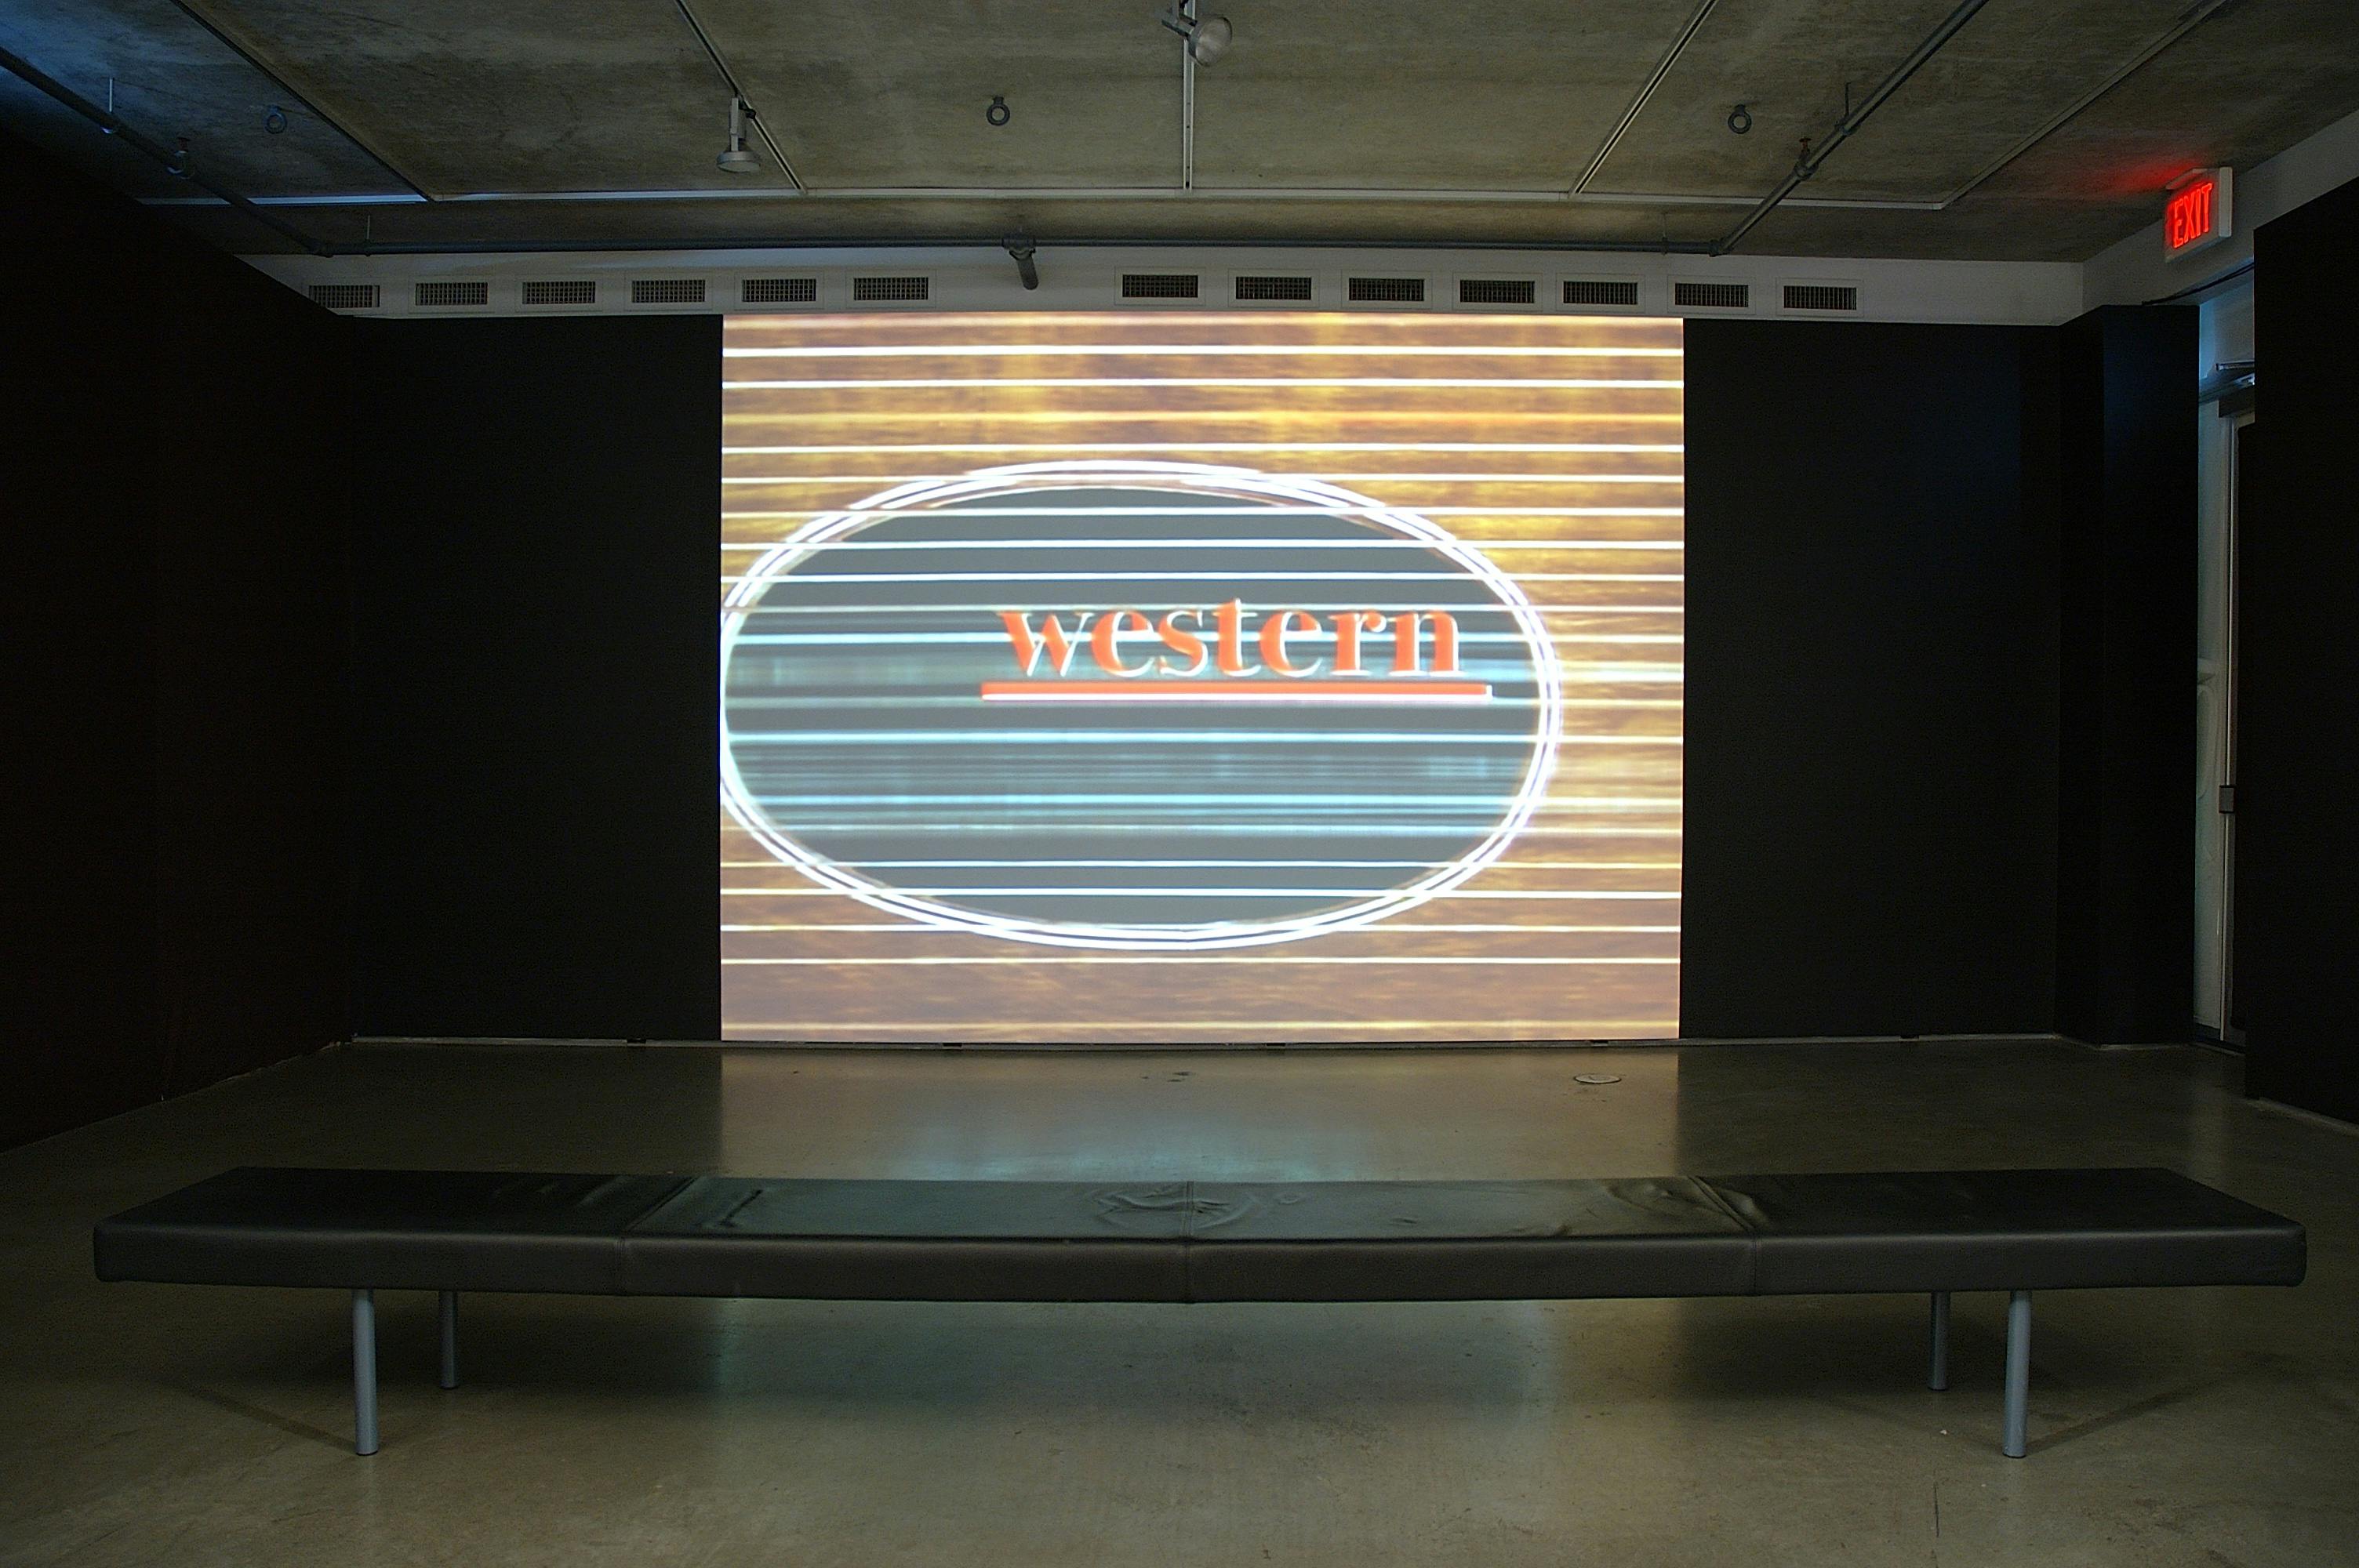 An installation image of a video projected on a wall in a dimly lighted gallery. The video shows a word "western."